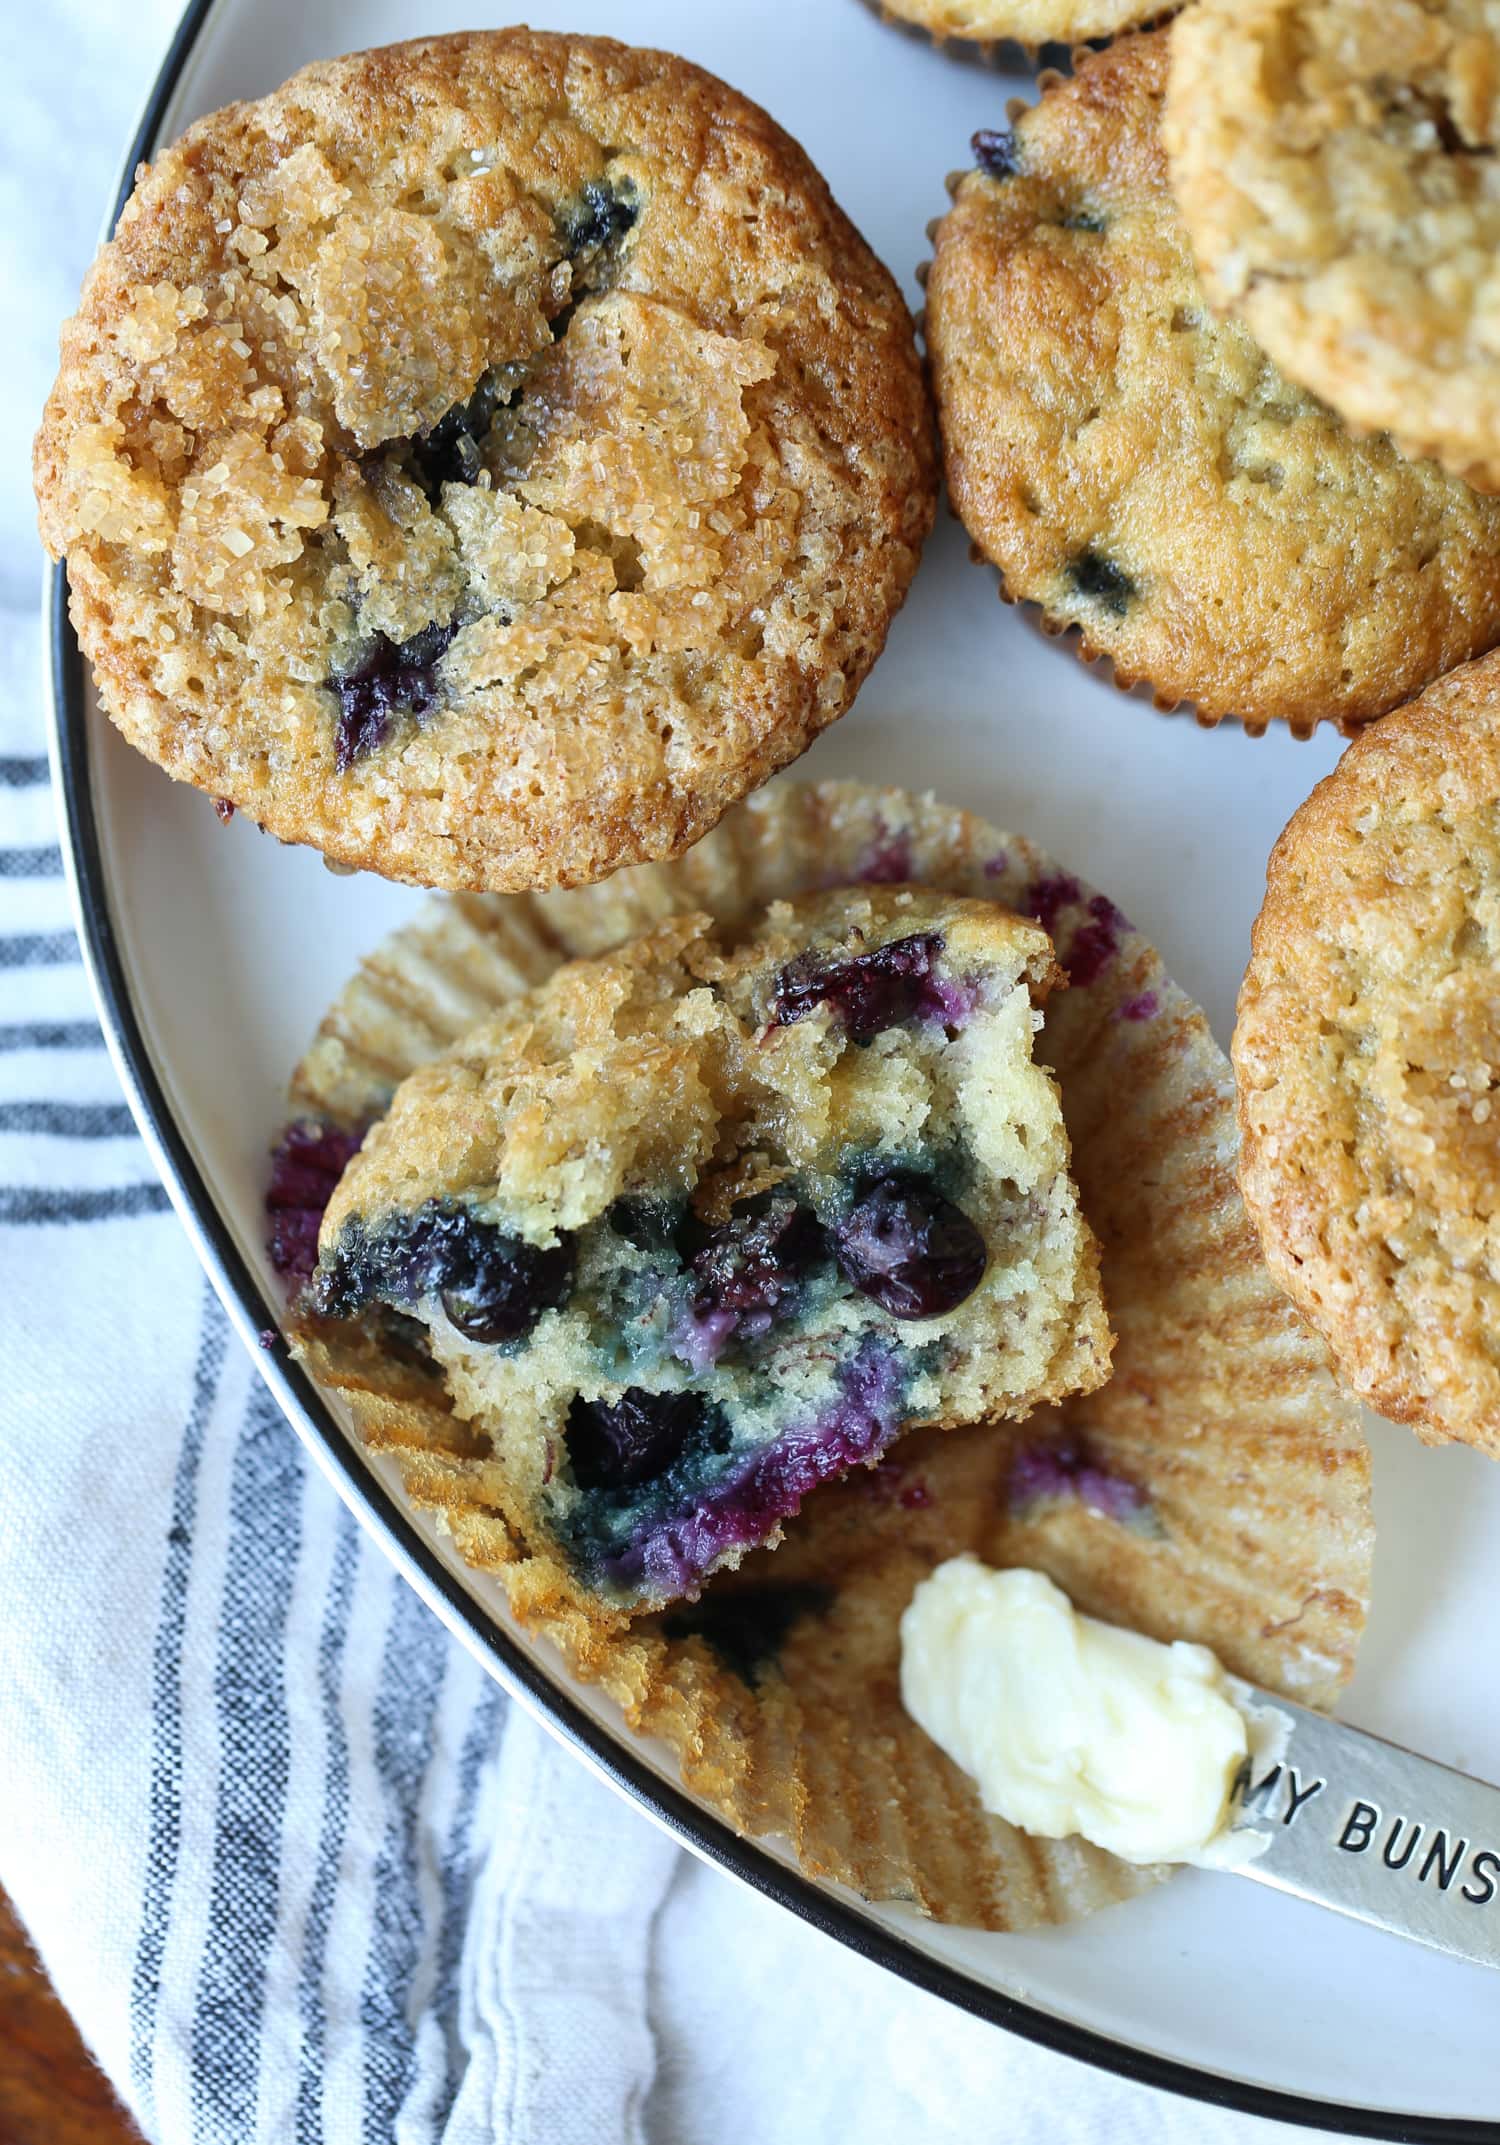 Banana blueberry muffins on a plate.